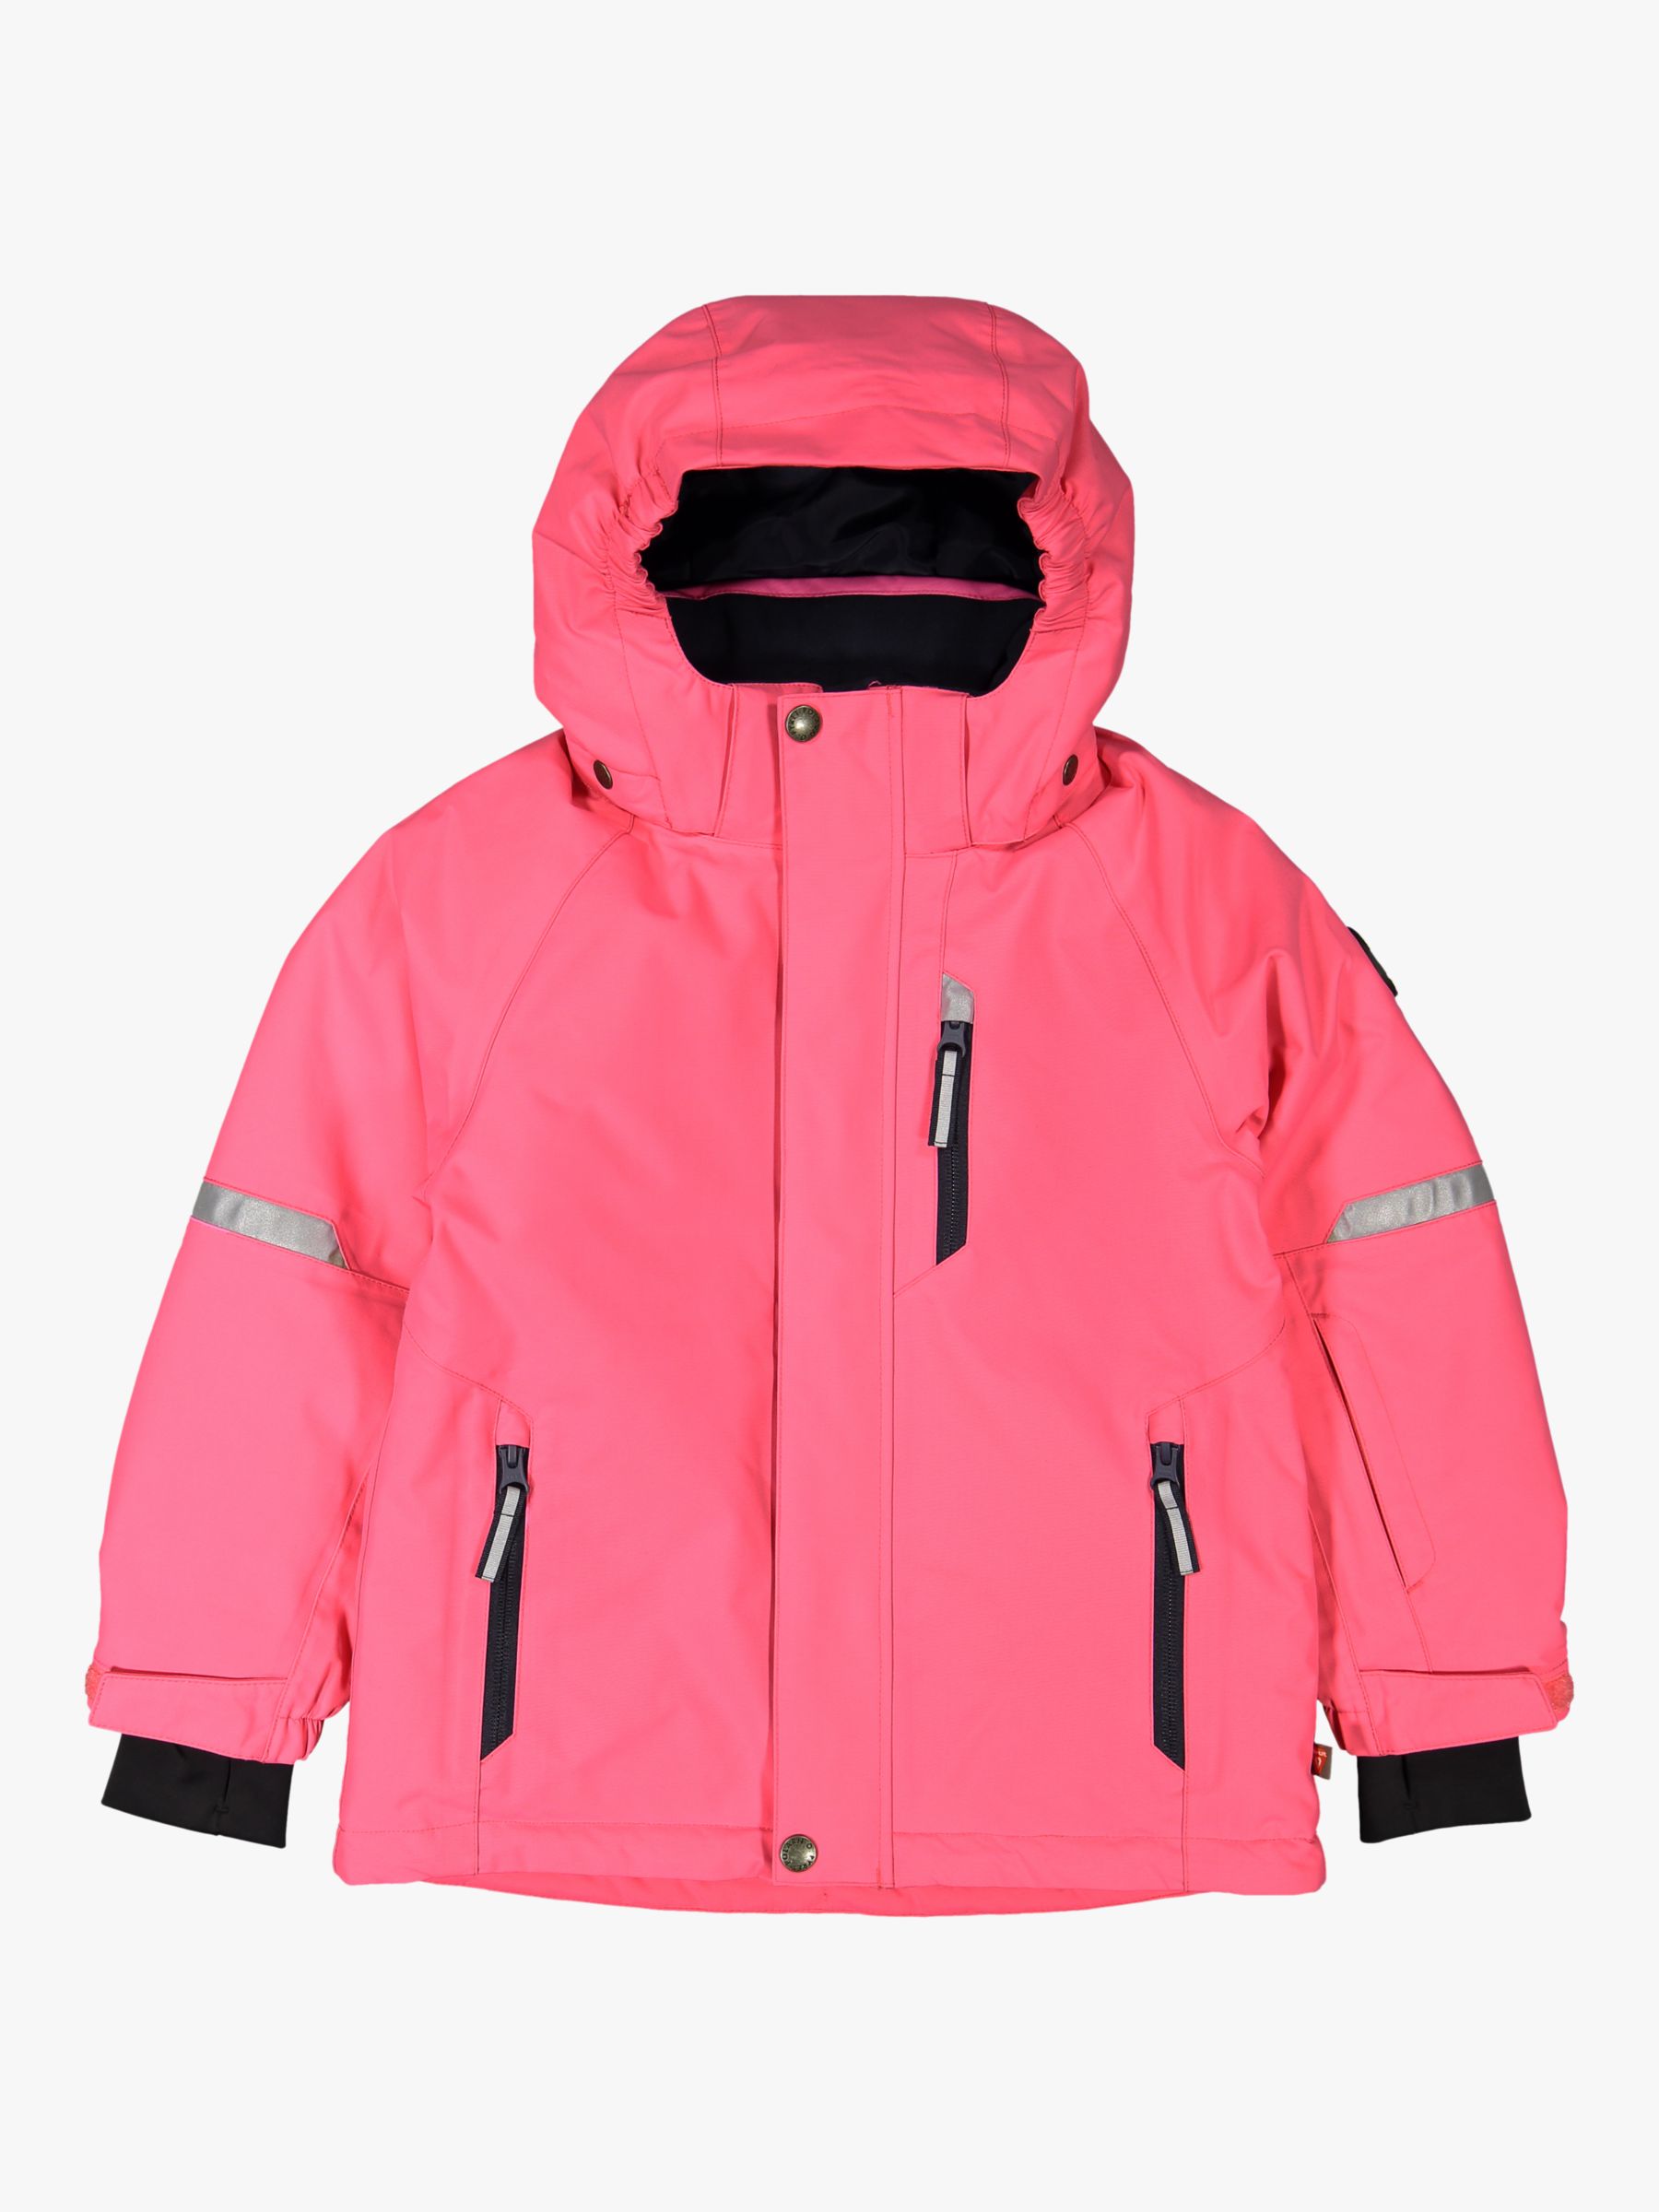 Image of Polarn O Pyret Childrens Waterproof Padded Coat Pink